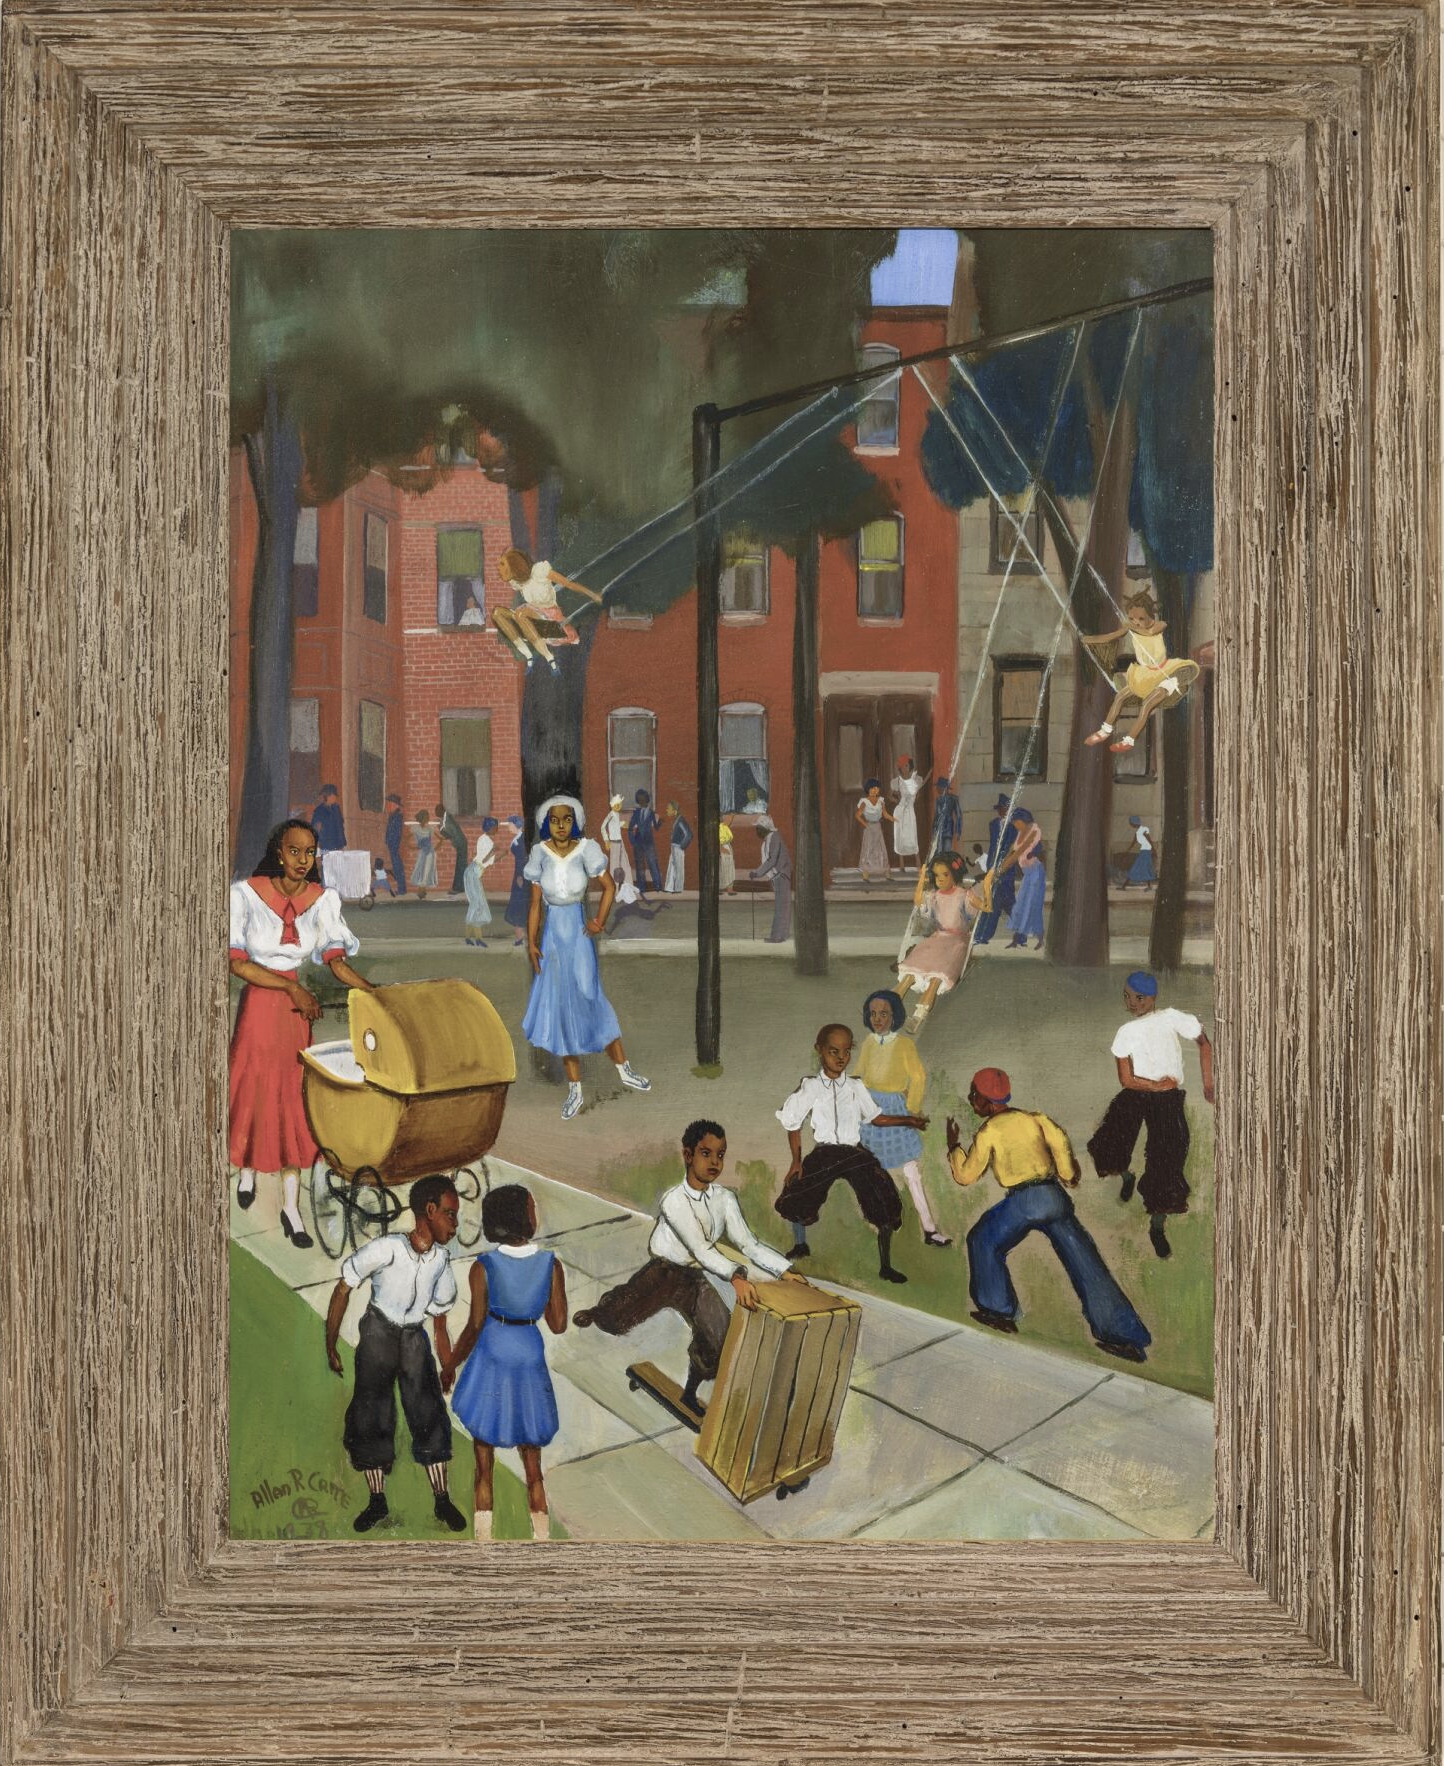 Allan Rohan Crite (American, 1910–2007), Play at Dark, 1935, oil on canvas board. Courtesy of the Thomas H. and Diane DeMell Jacobsen PhD Foundation.